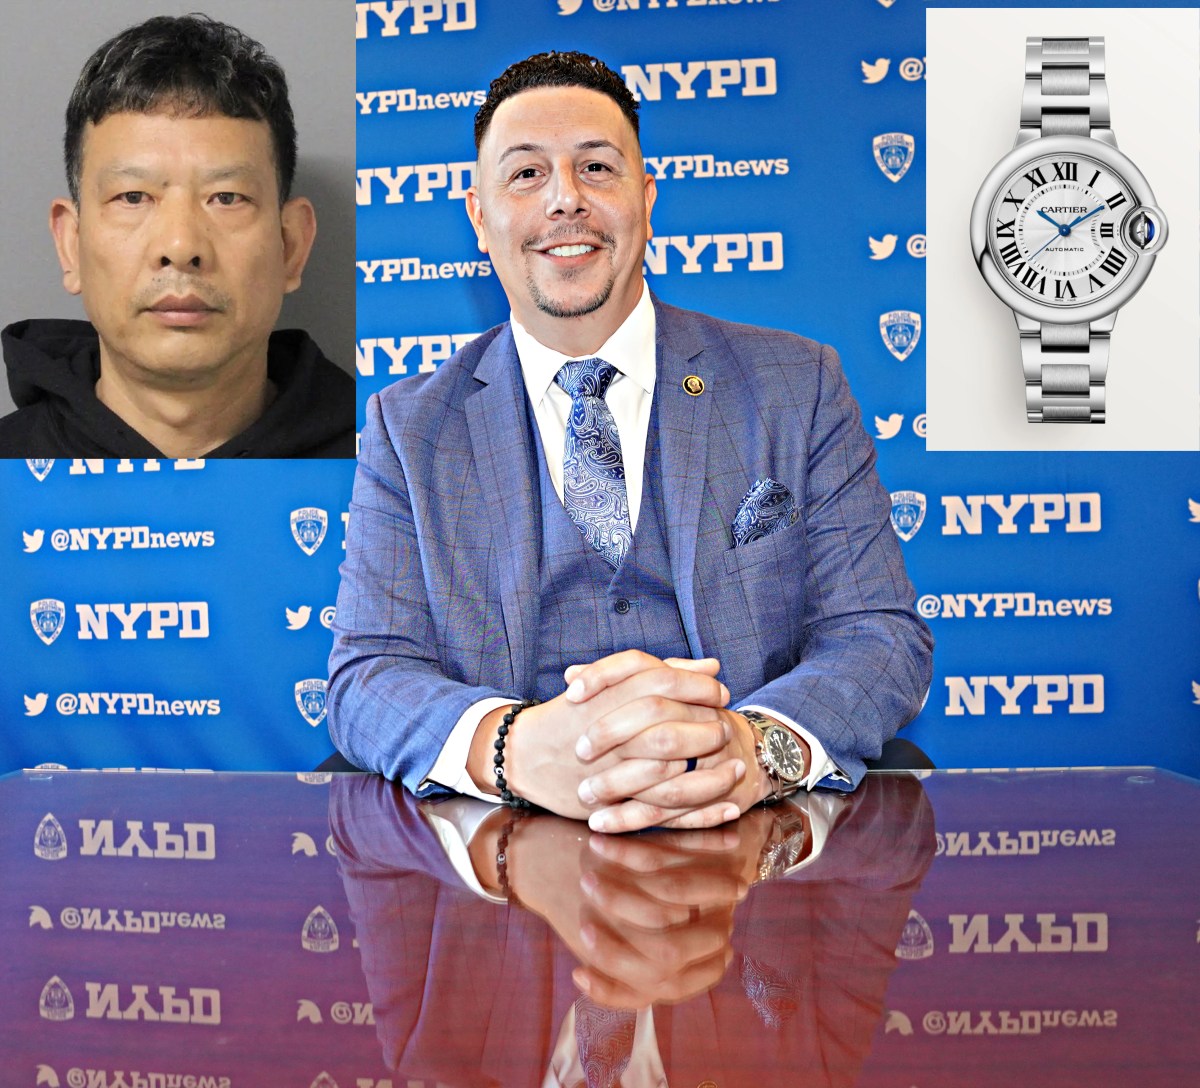 NYPD detective who arrested international jewelry thief